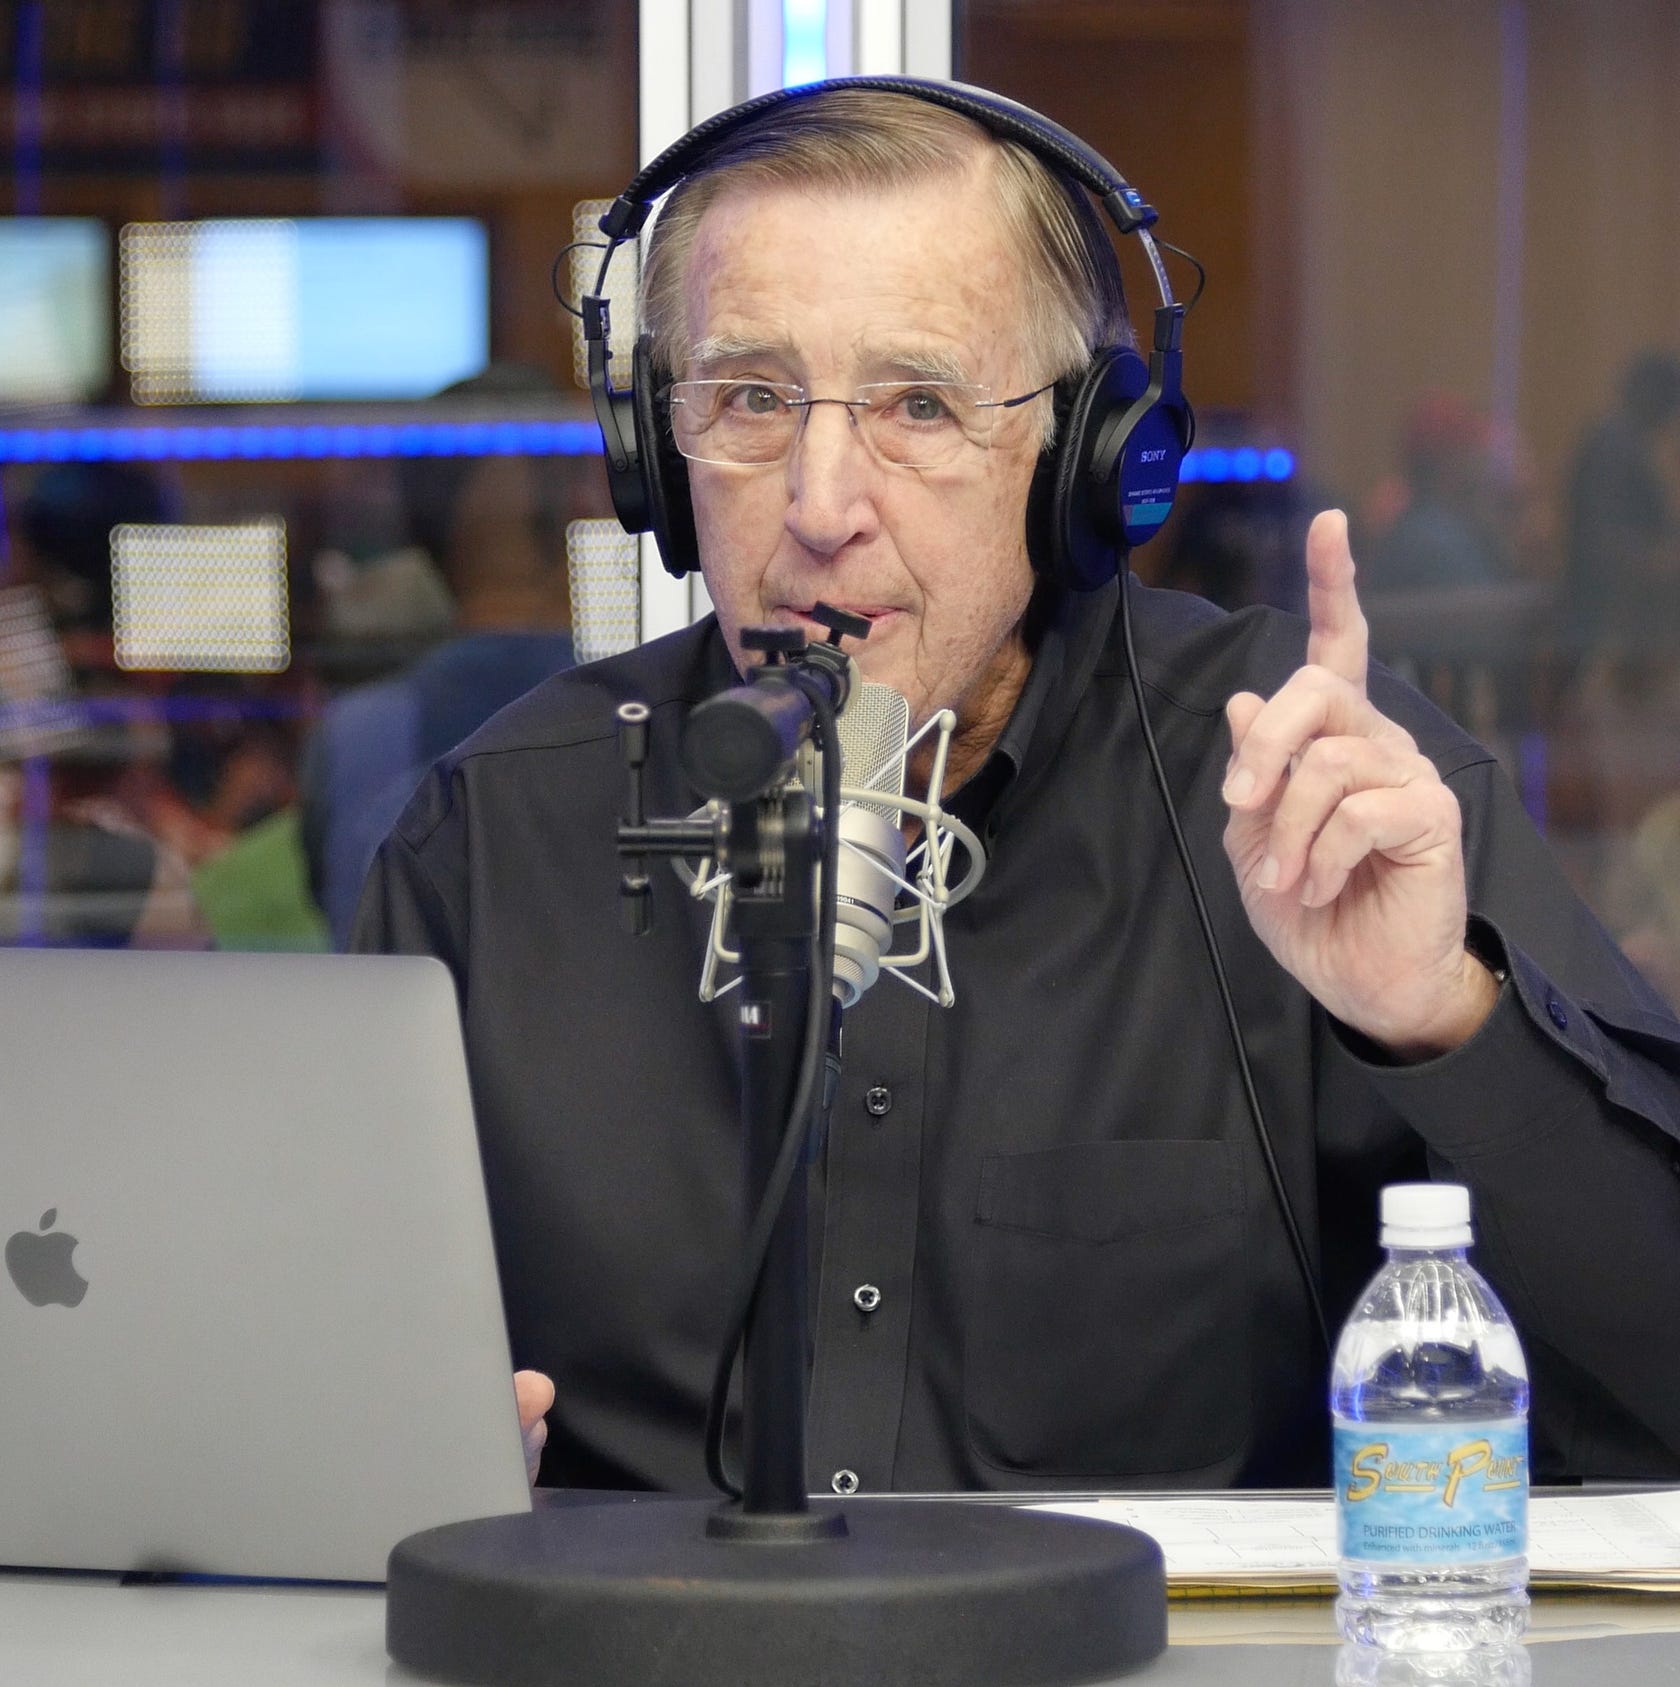 Veteran broadcaster Brent Musburger drew headlines in 2013 for an inappropriate comment about Katherine Webb-McCarron.